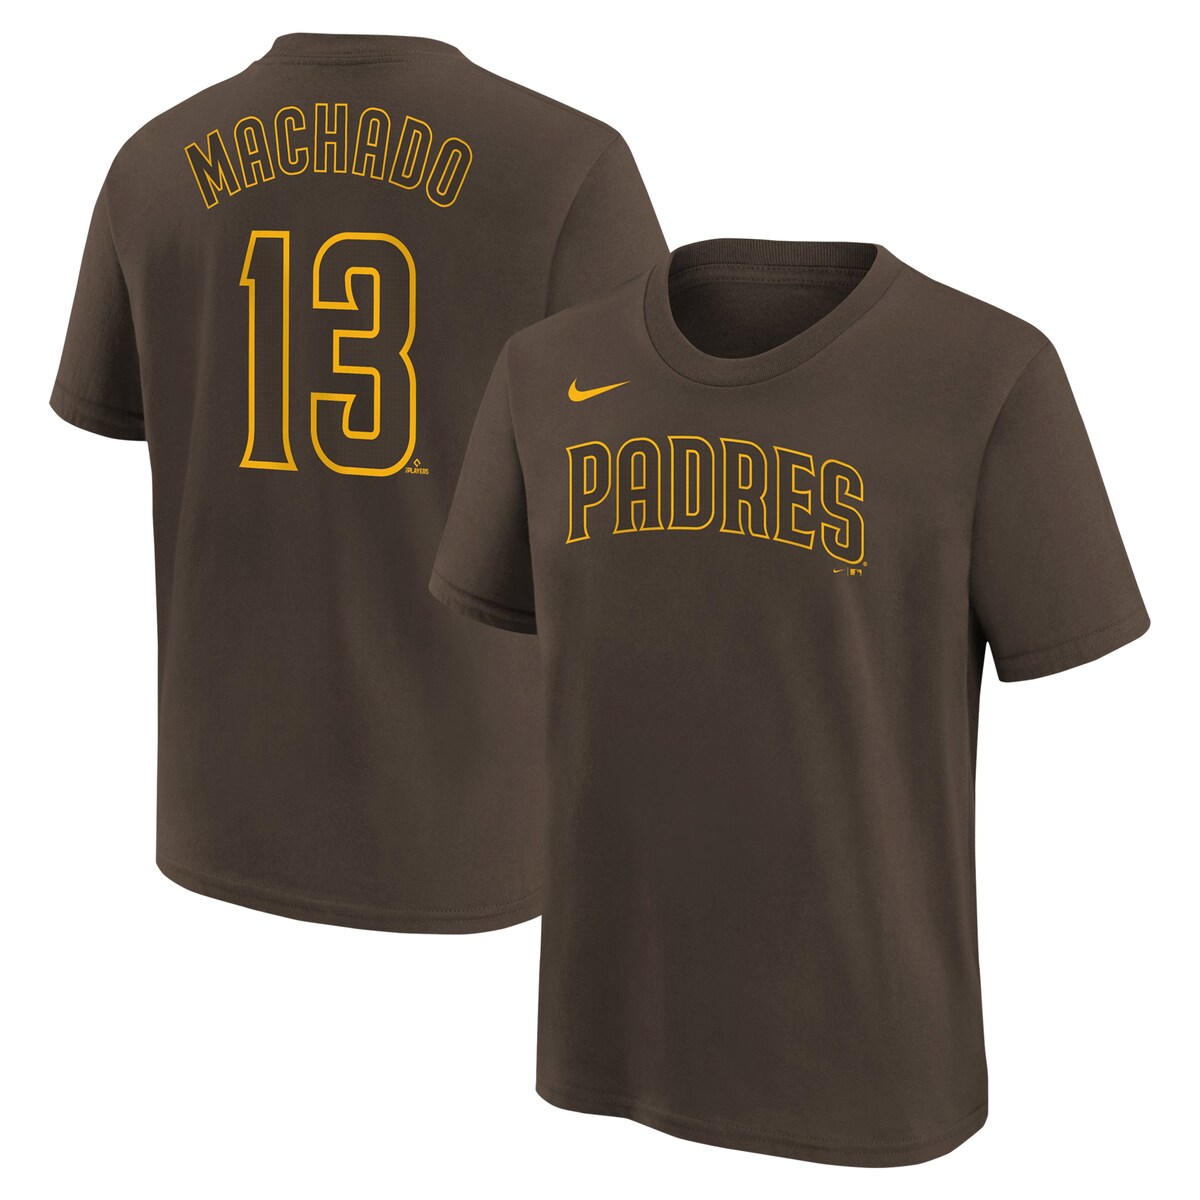 Manny Machado is consistently one of the most dominant players in the diamond. This Home Name and Number T-shirt from Nike is a strong tribute to your kiddo's favorite San Diego Padres player. Designed with a classic crew neckline, this player tee features bold graphics on the front and back so your youngster can proudly support their San Diego Padres.Machine wash, tumble dry lowImportedOfficially licensedBrand: NikeShort sleeveMaterial: 100% CottonScreen print graphicsCrew neck